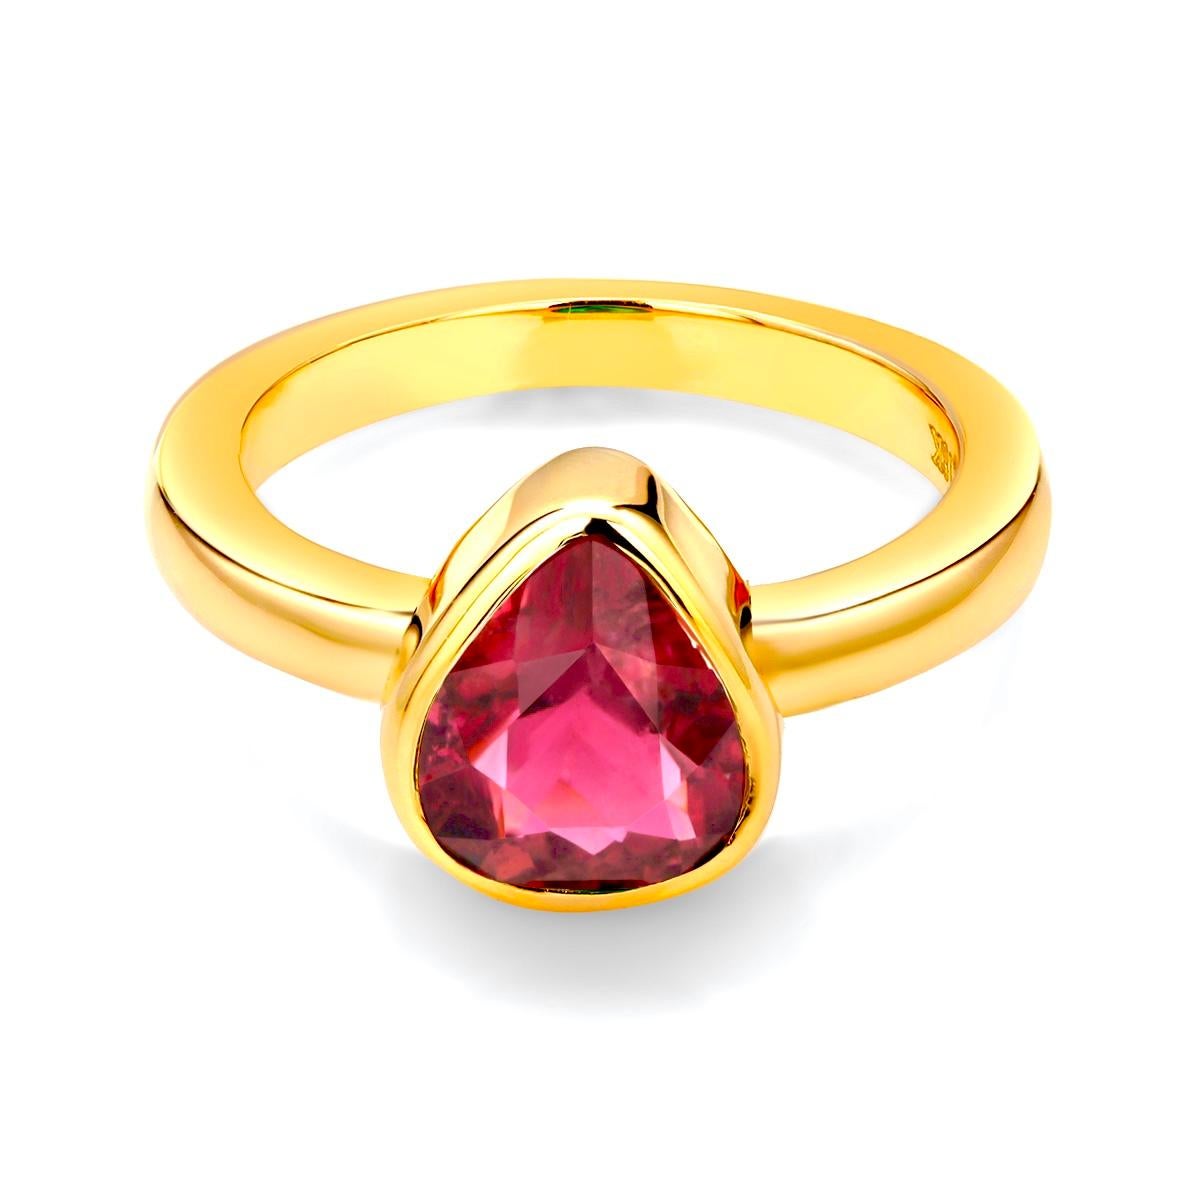 Women's Trillion Shape Rubellite Bezel Raised Dome Yellow Gold Cocktail Ring